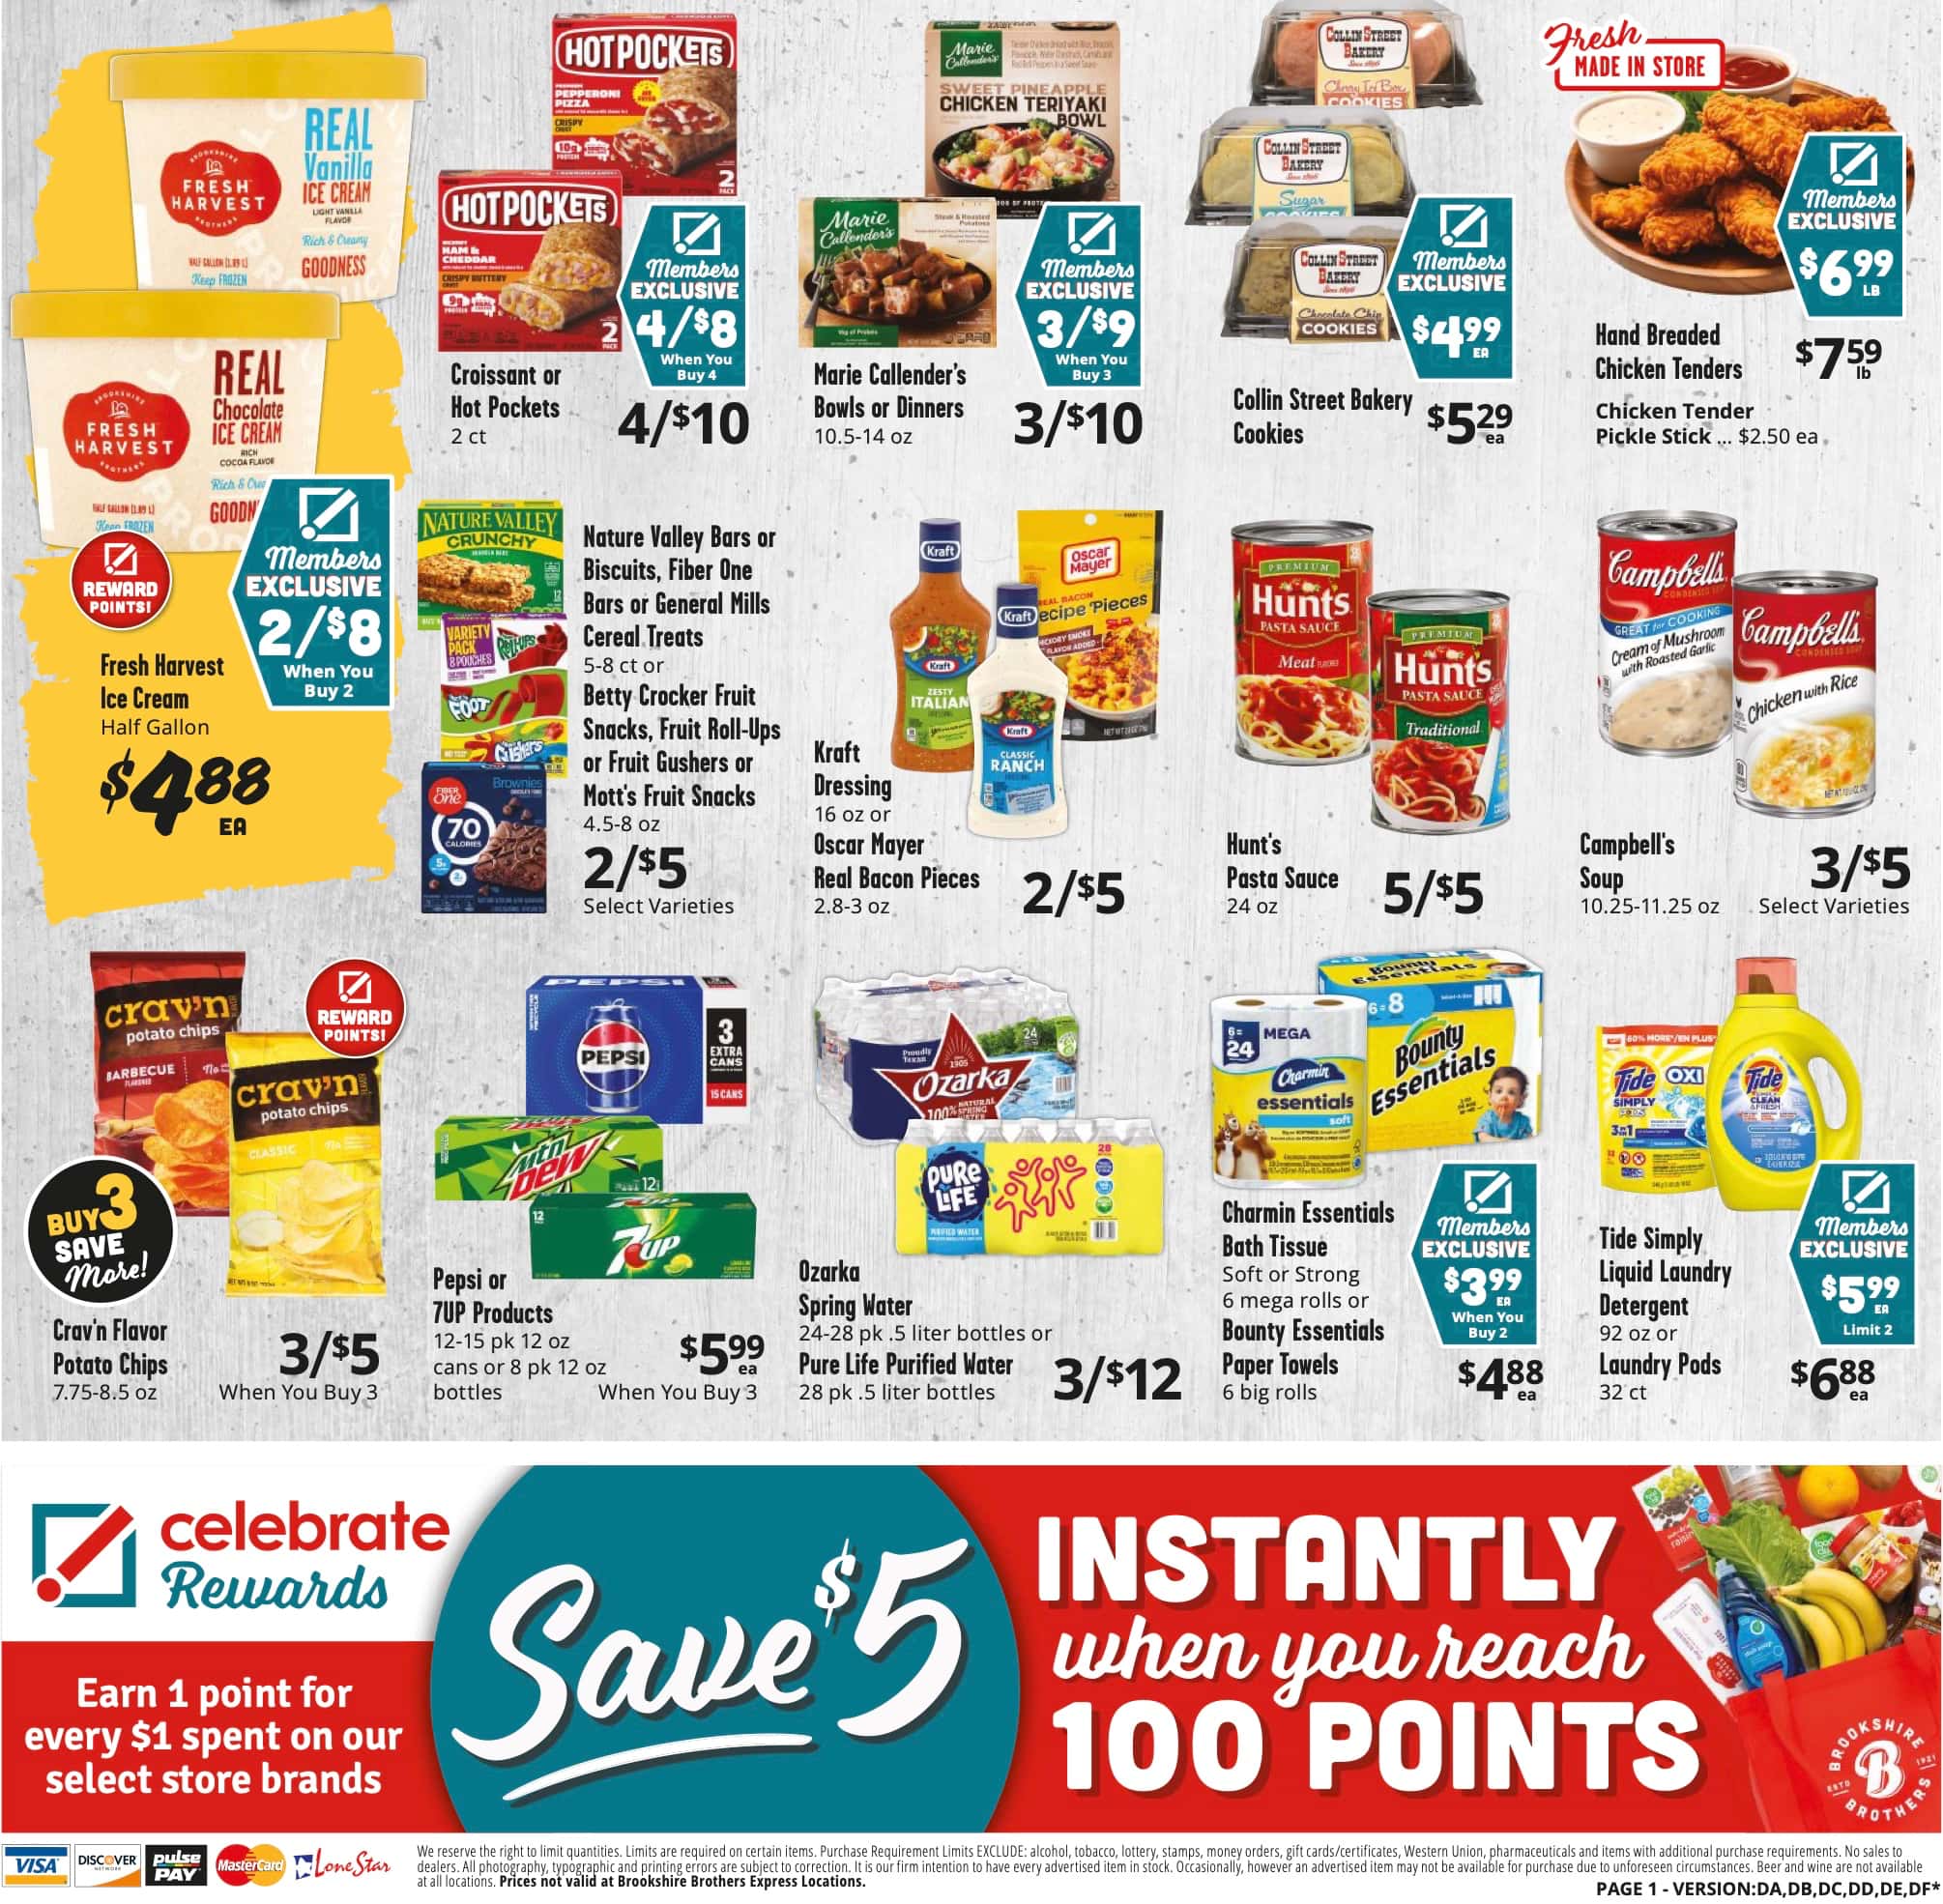 Brookshire Brothers Weekly Ad March 6 - 12, 2024